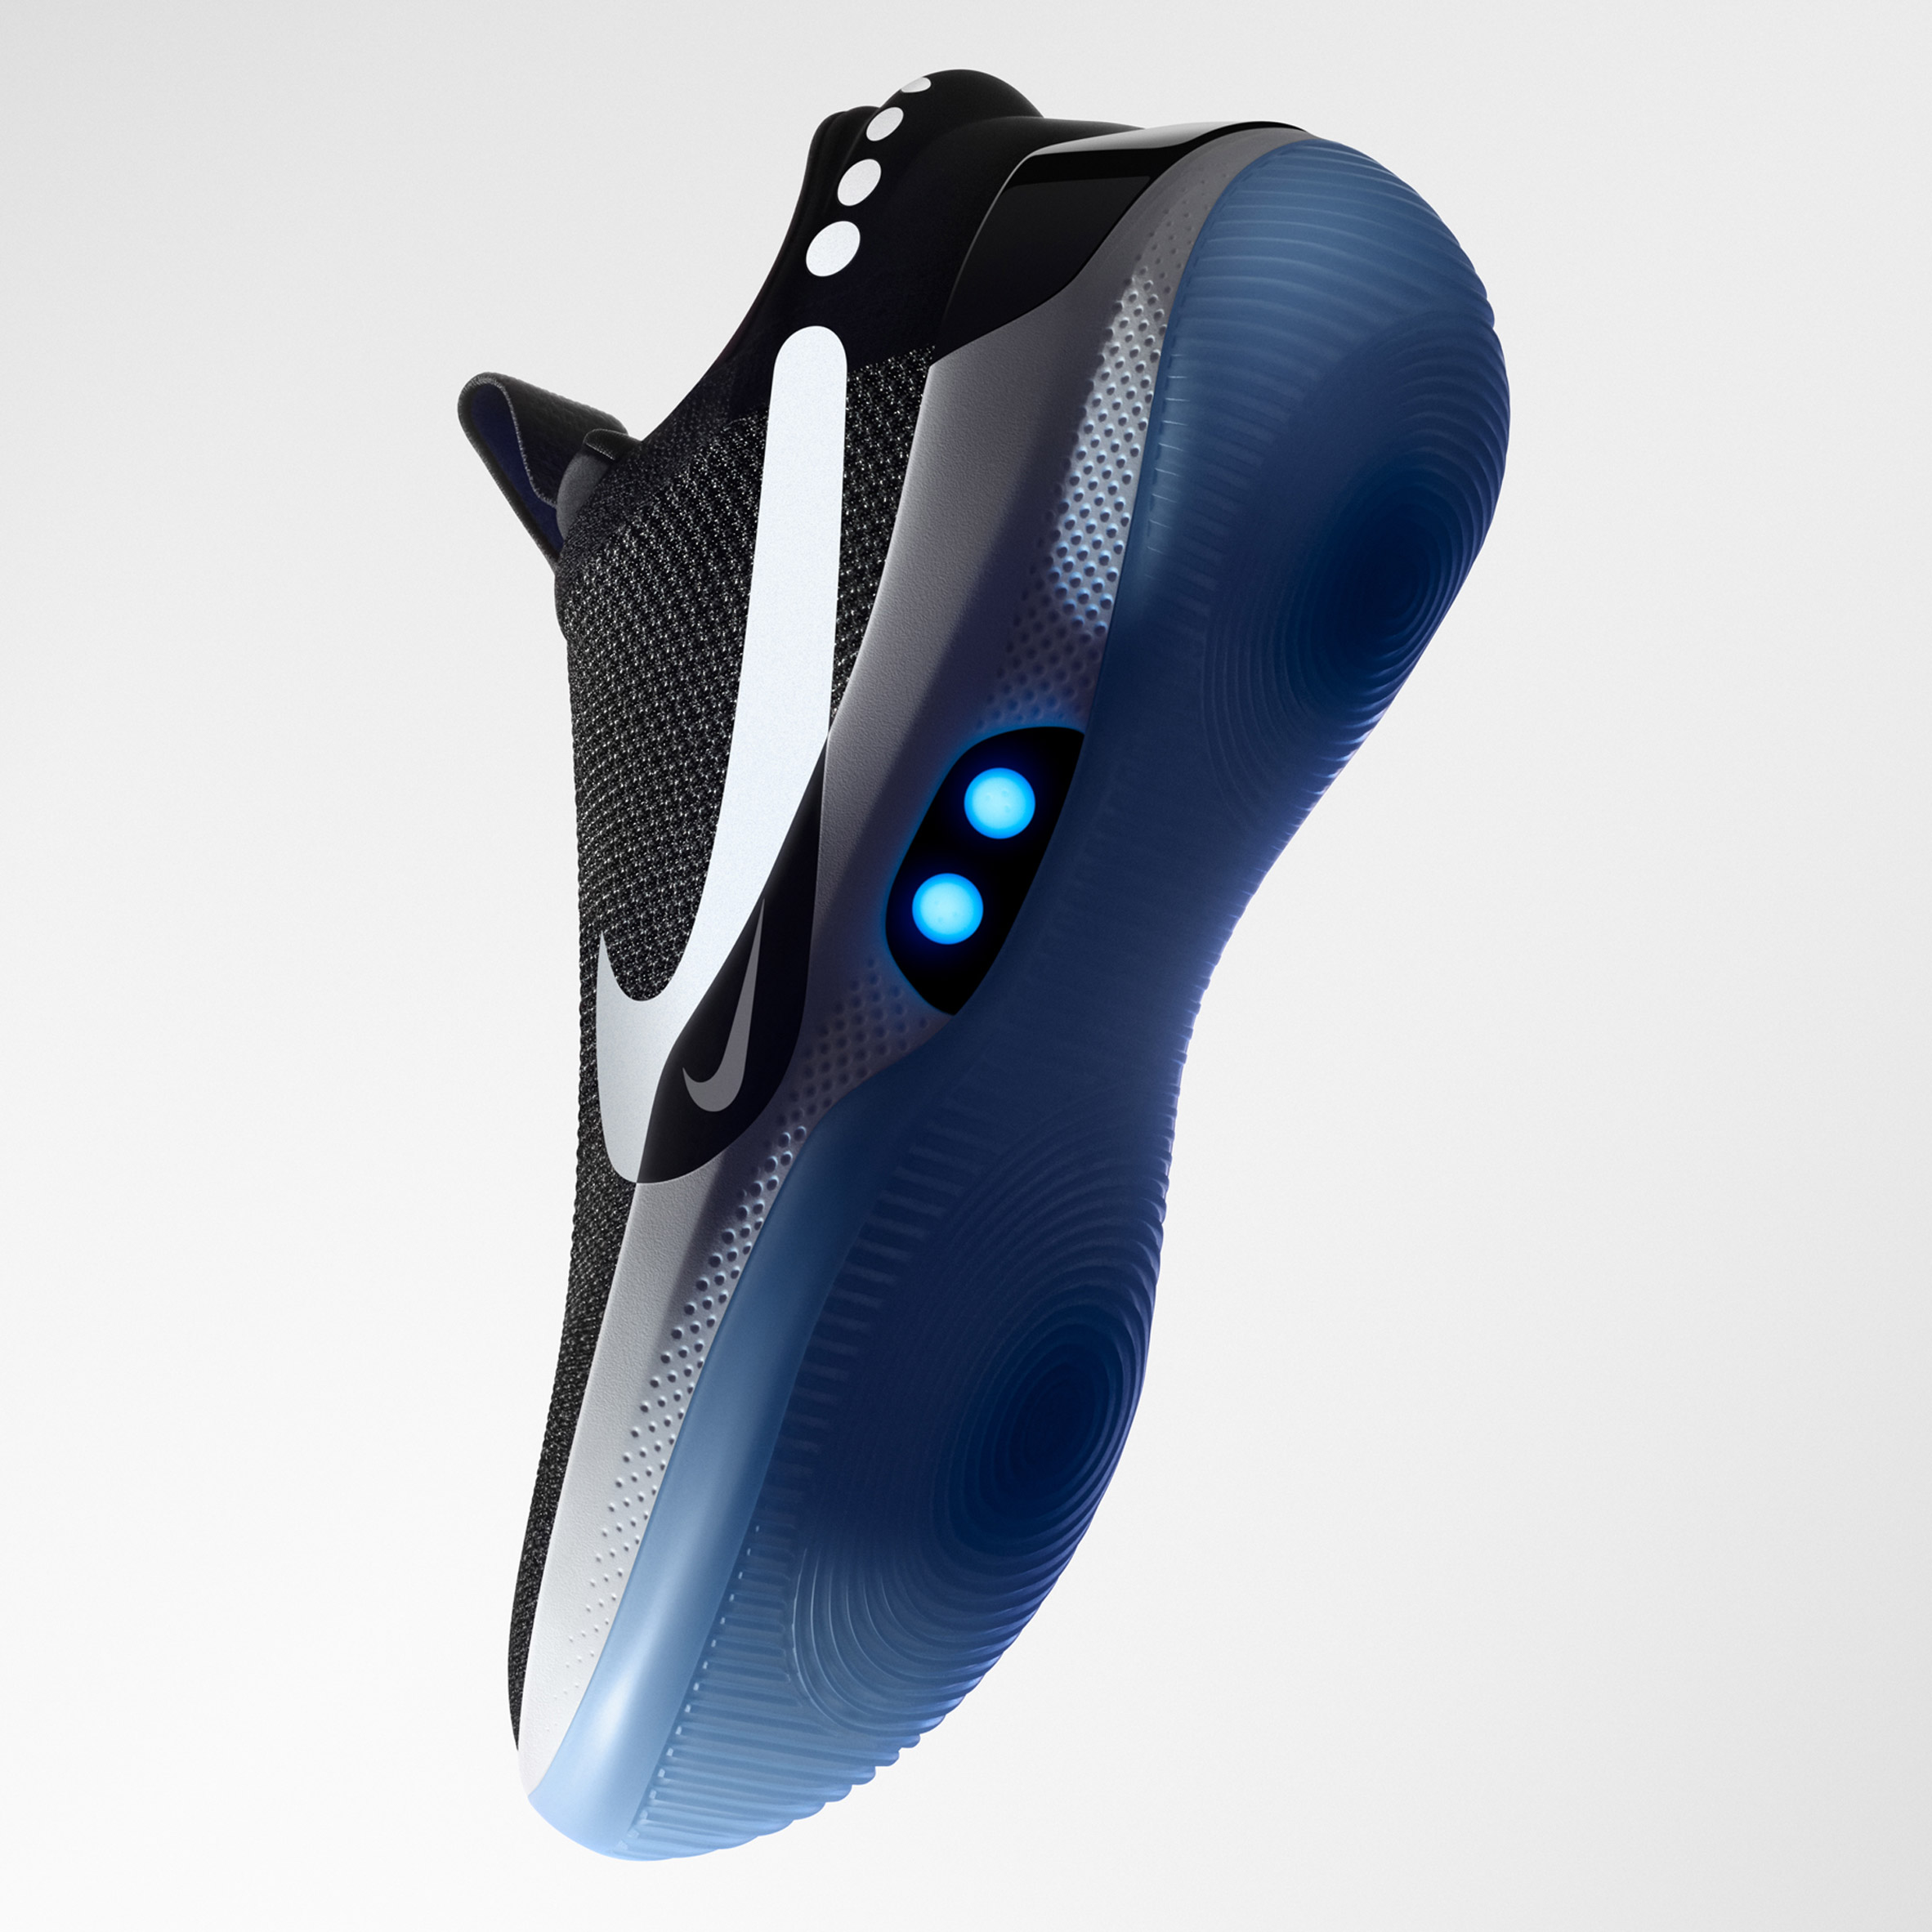 Nike Adapt BB smart basketball sneakers feature self-lacing technology